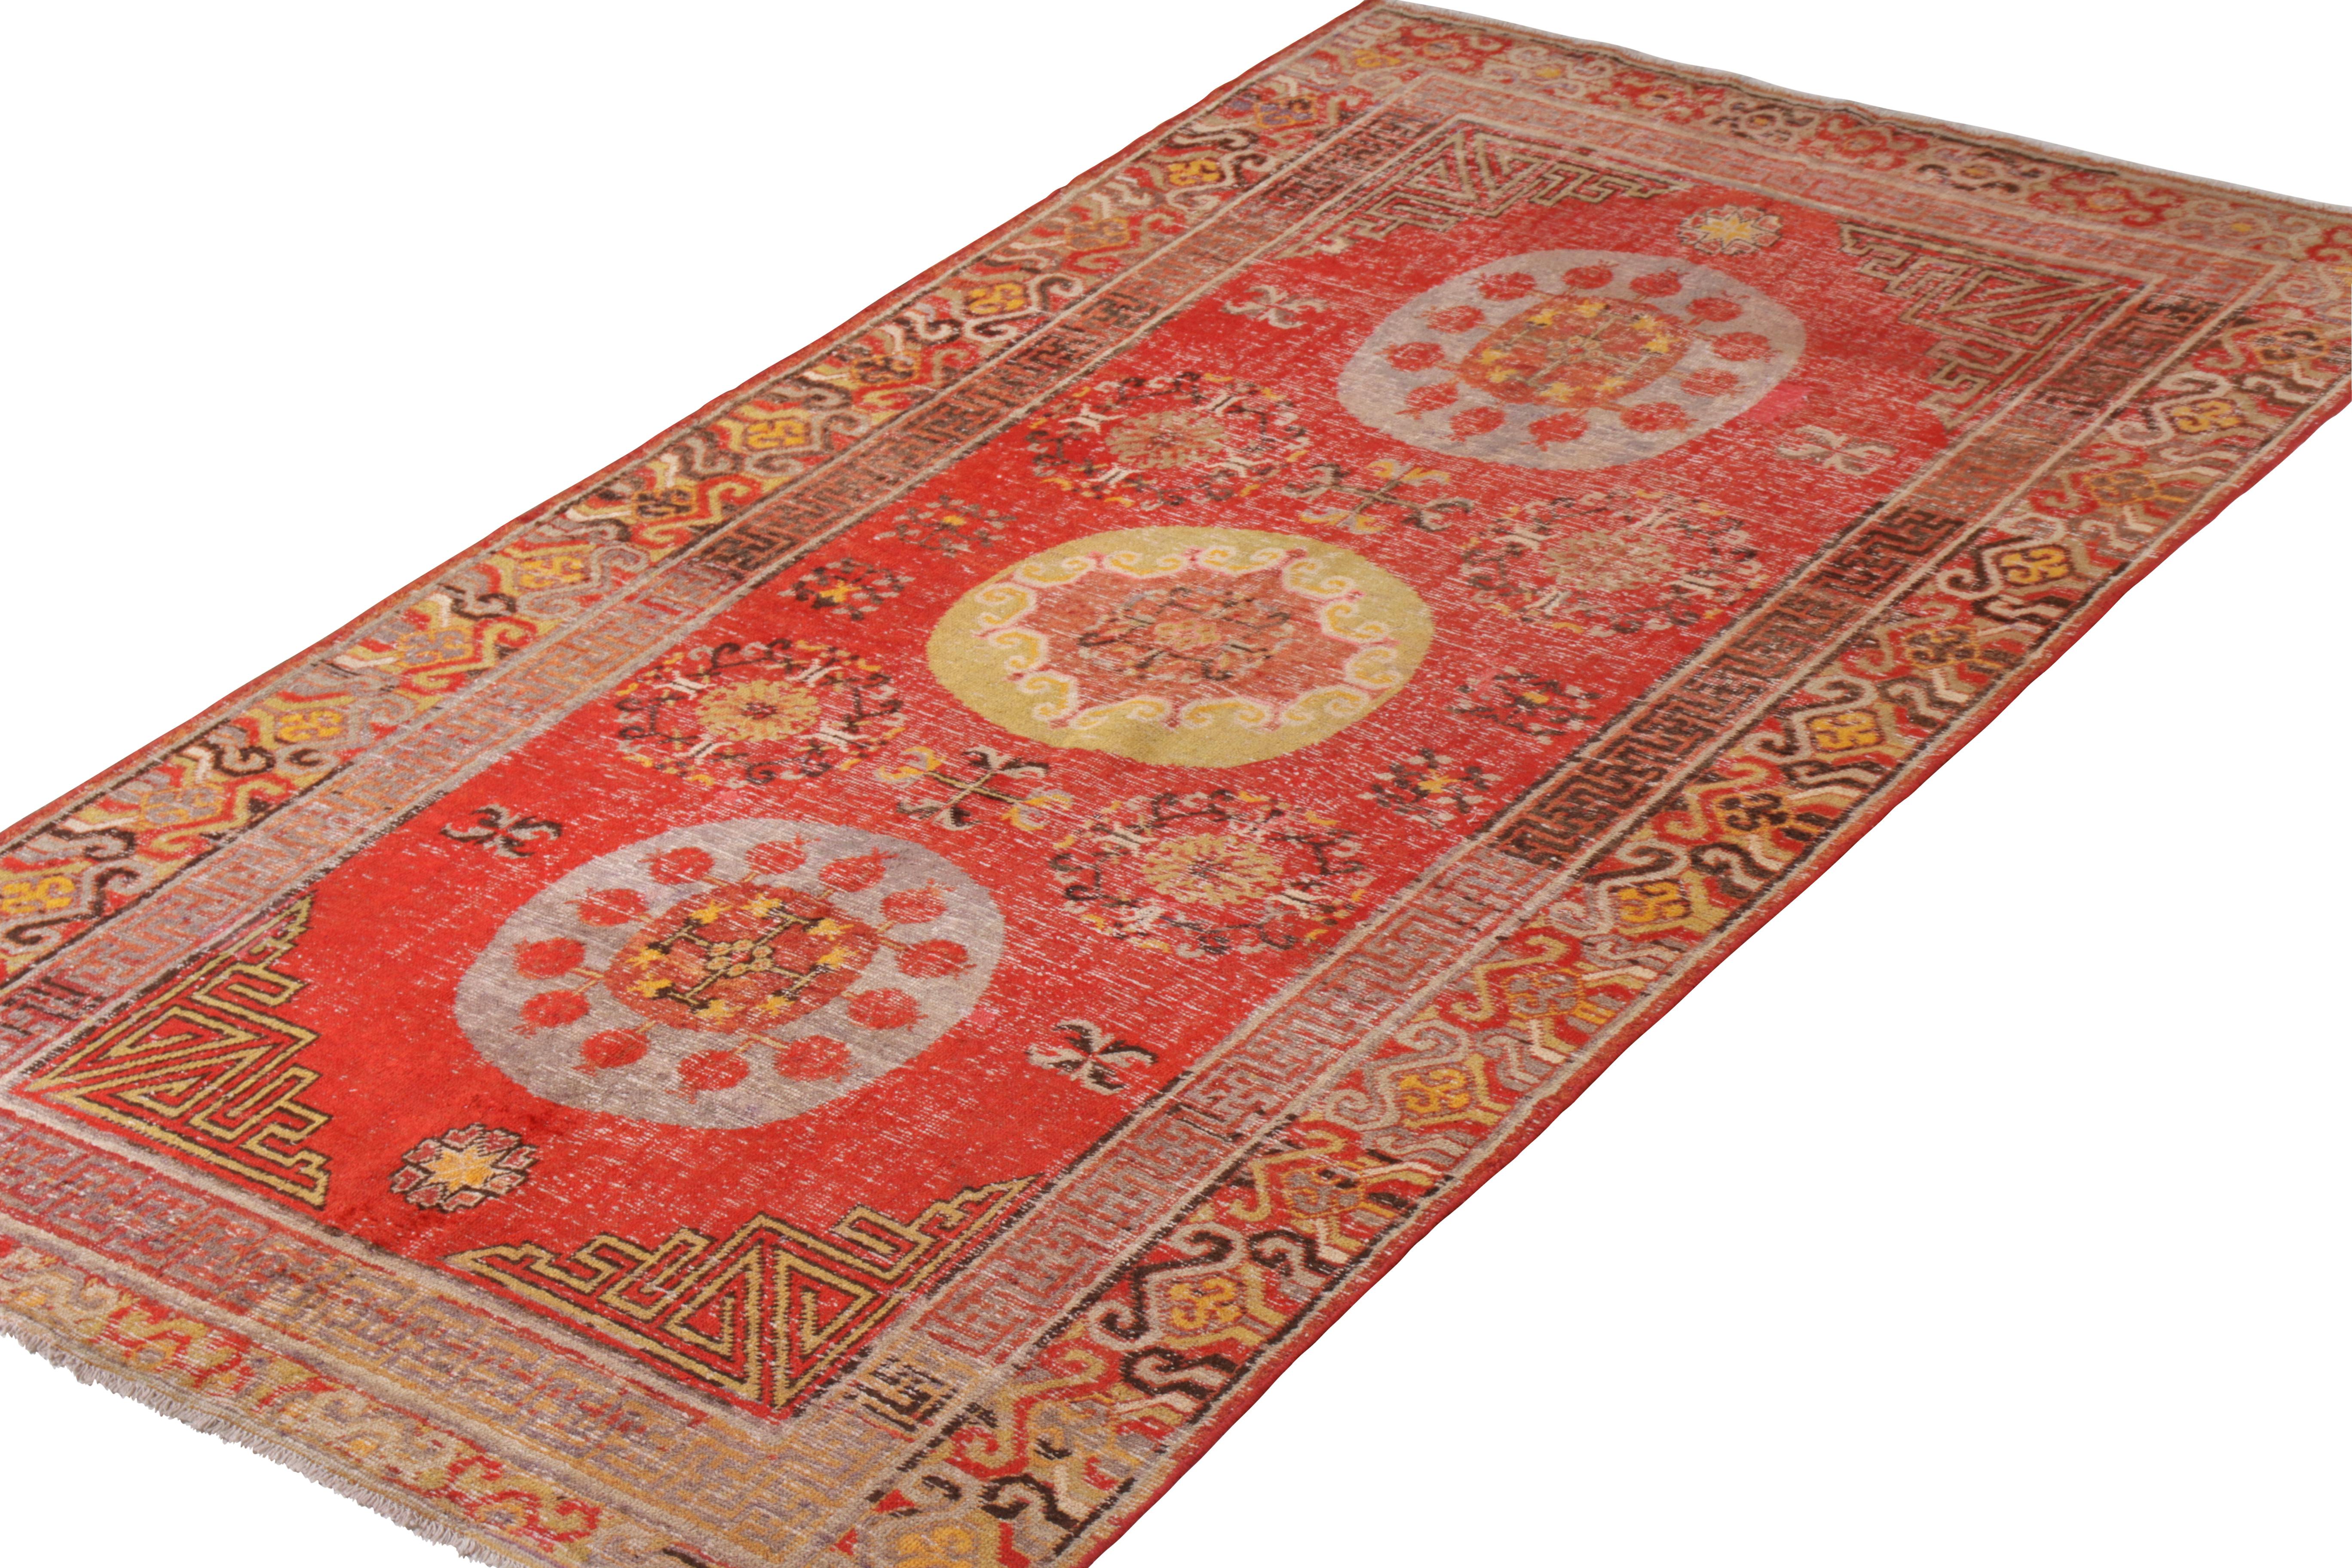 An antique 6 x 11 Khotan rug in red and gold, enjoying rosette medallion patterns celebrated in this renowned oriental style. Hand knotted in wool, aged into a handsome distressed aesthetic complementing the traditional style in this classic piece.